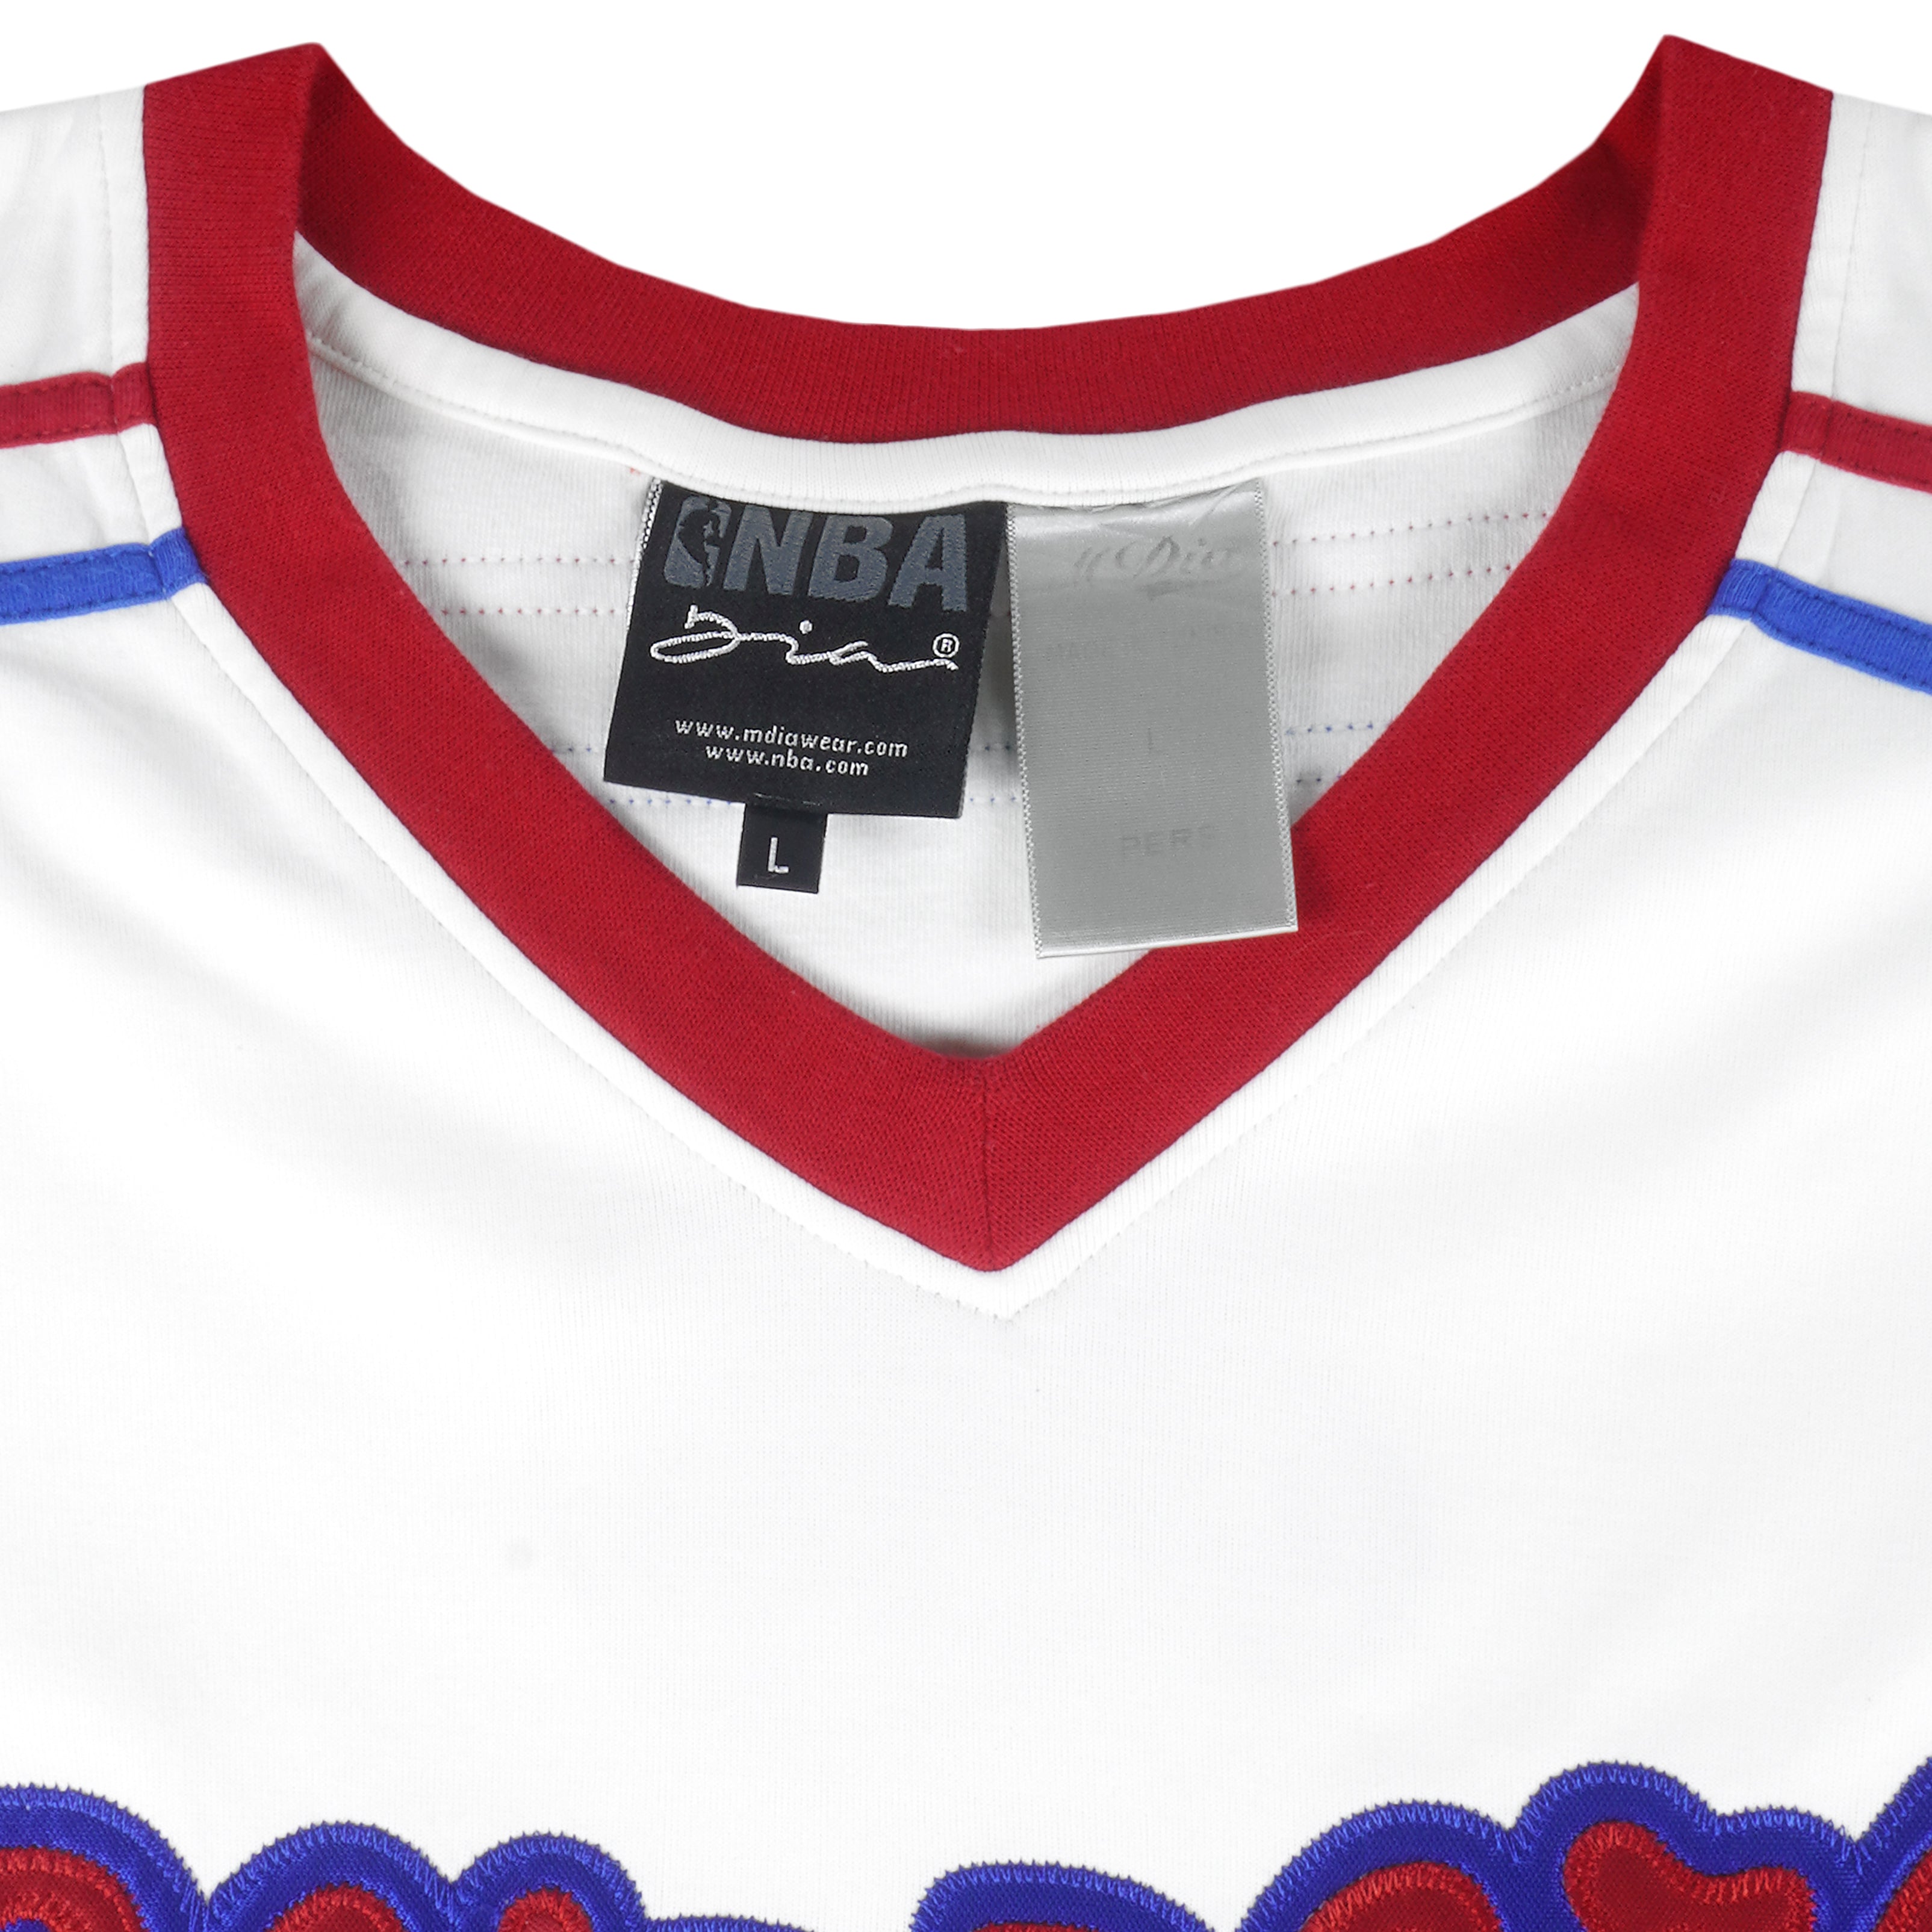 retro clippers jersey